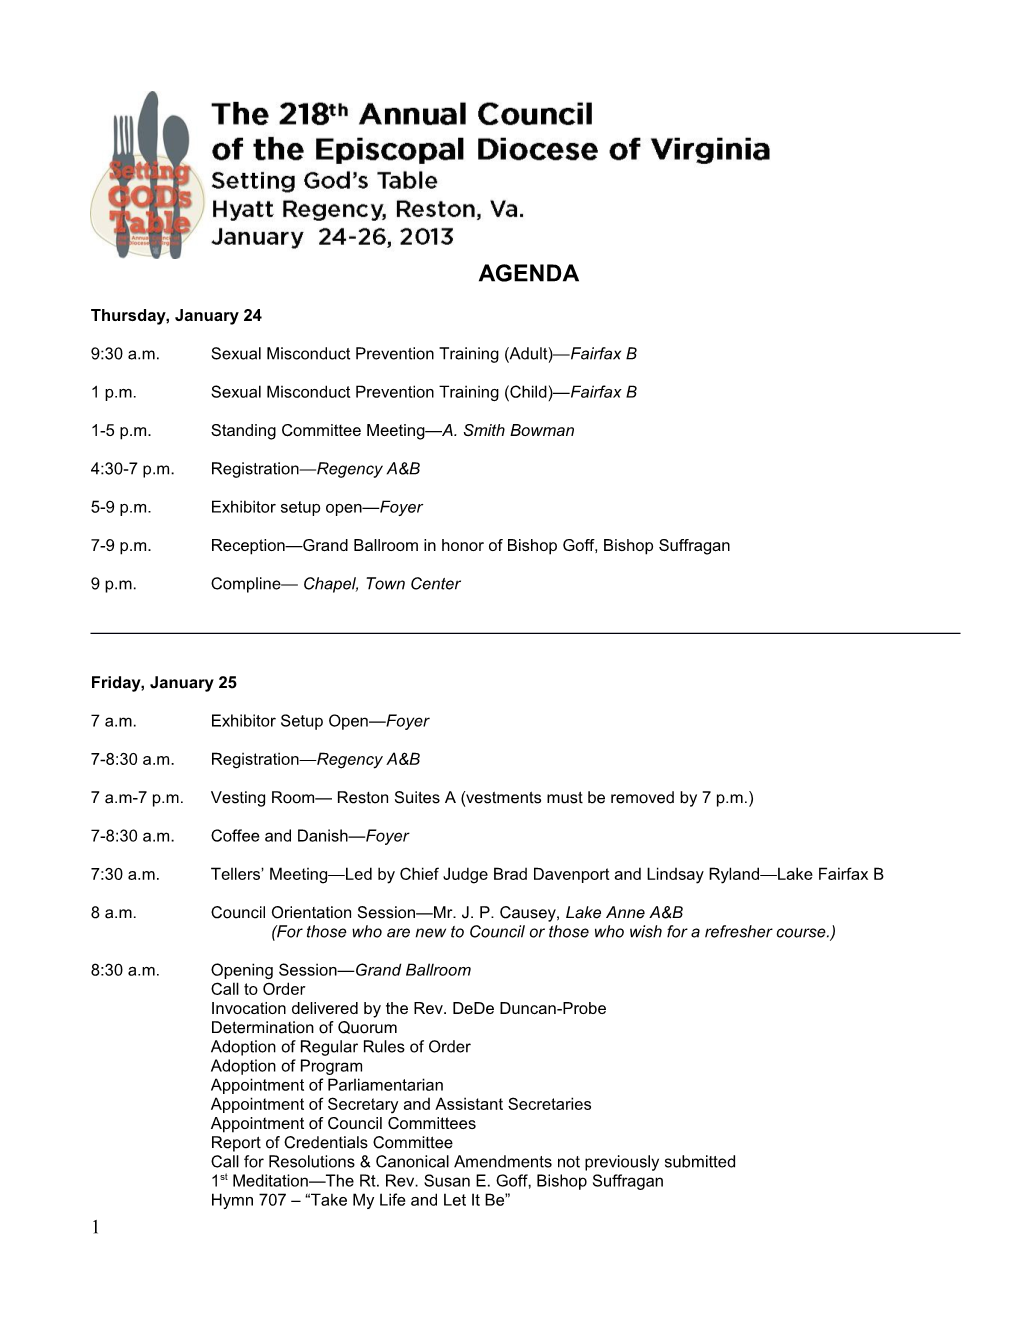 Agenda: Planning Meeting for 2010 Annual Council